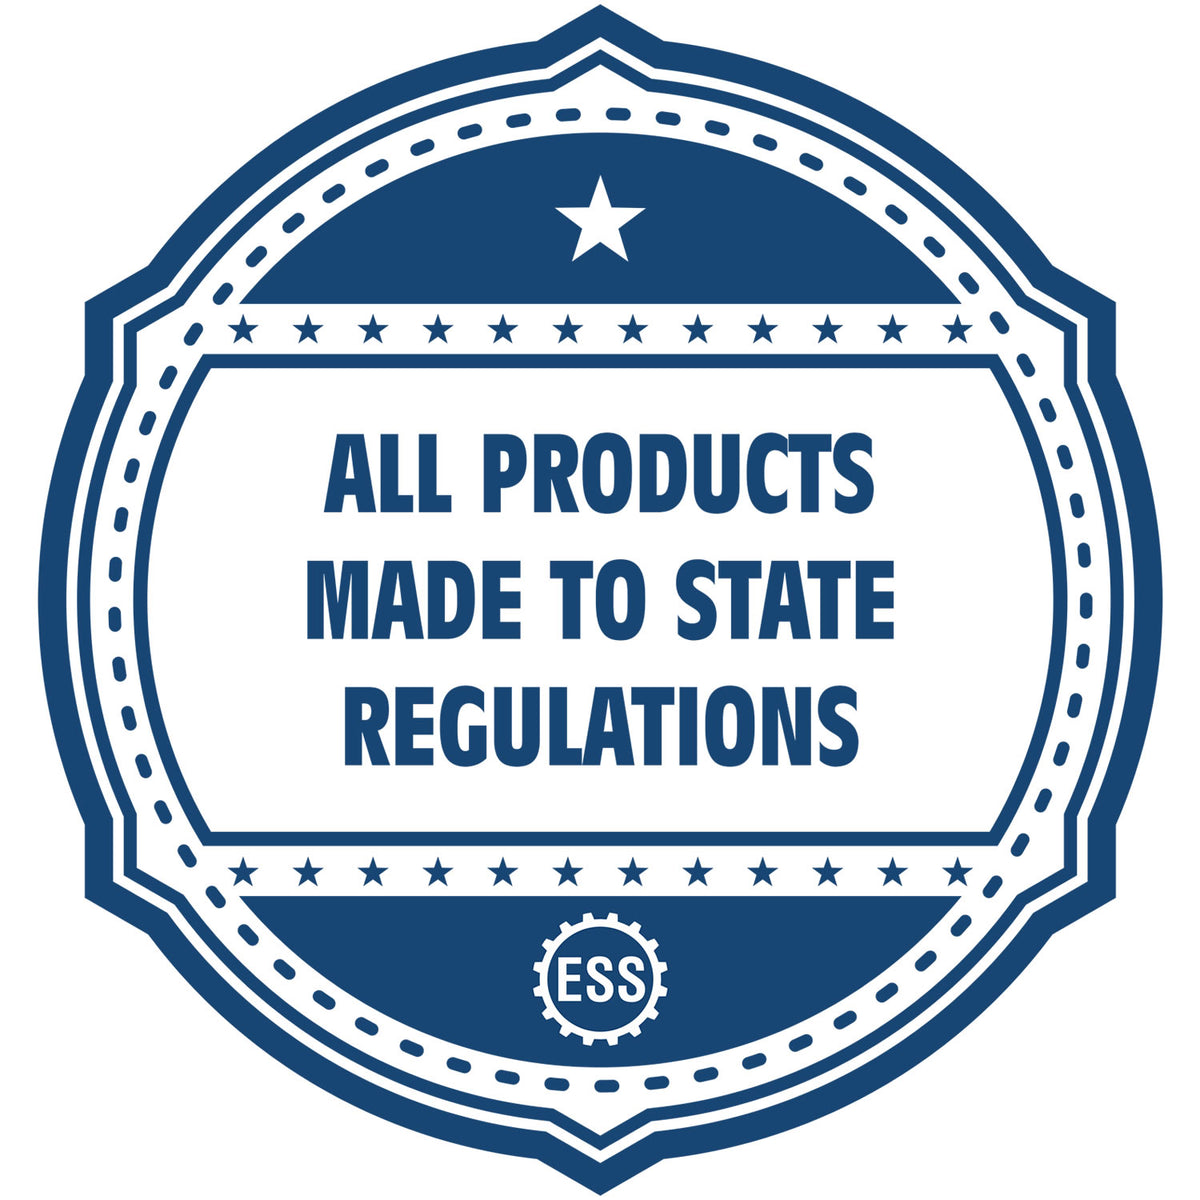 An icon or badge element for the Handheld Georgia Land Surveyor Seal showing that this product is made in compliance with state regulations.